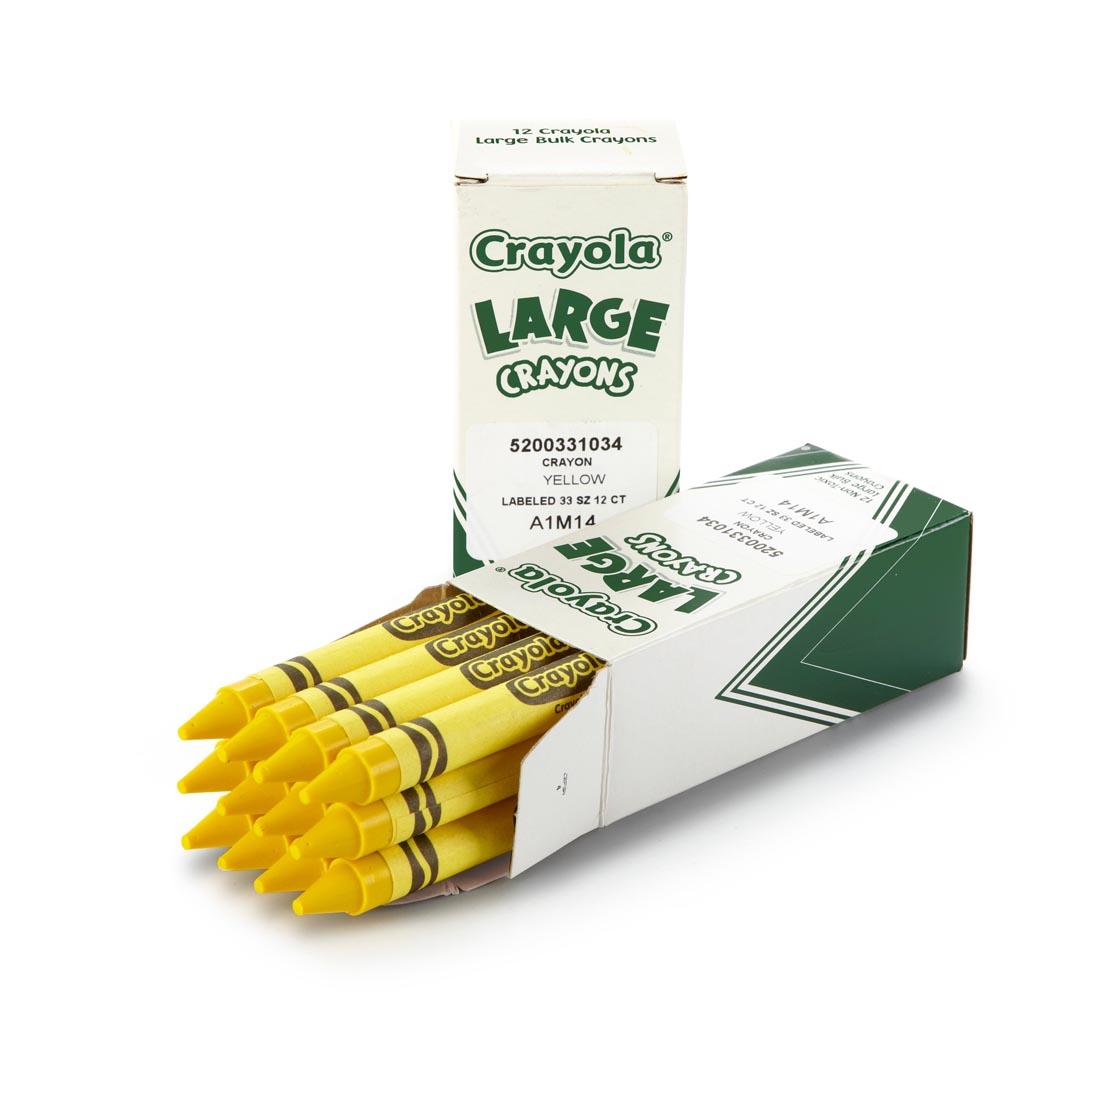 Crayola Large Crayon Refill boxes shown both closed and with yellow crayons inside